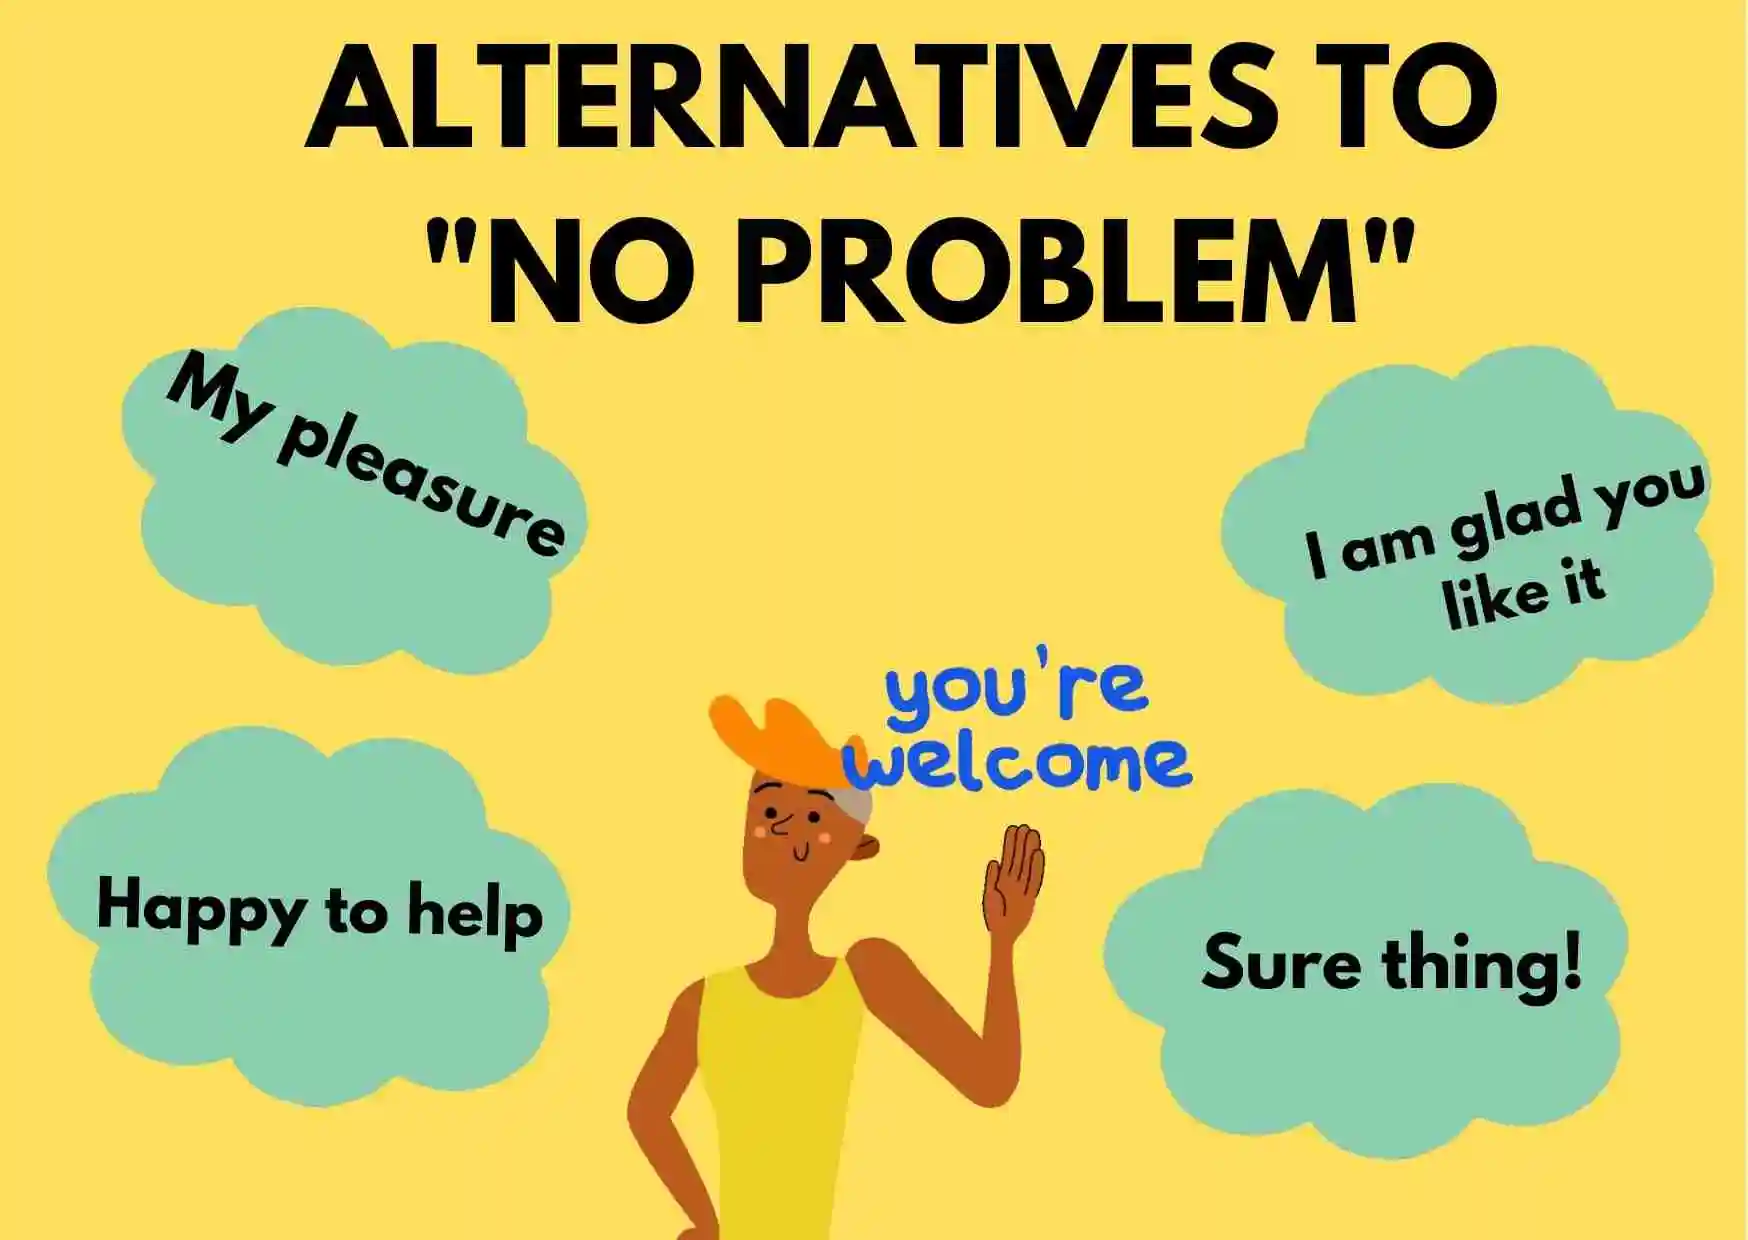 Graphic showing alternatives to using "no problem" for example "My pleasure" or "Happy to help!"